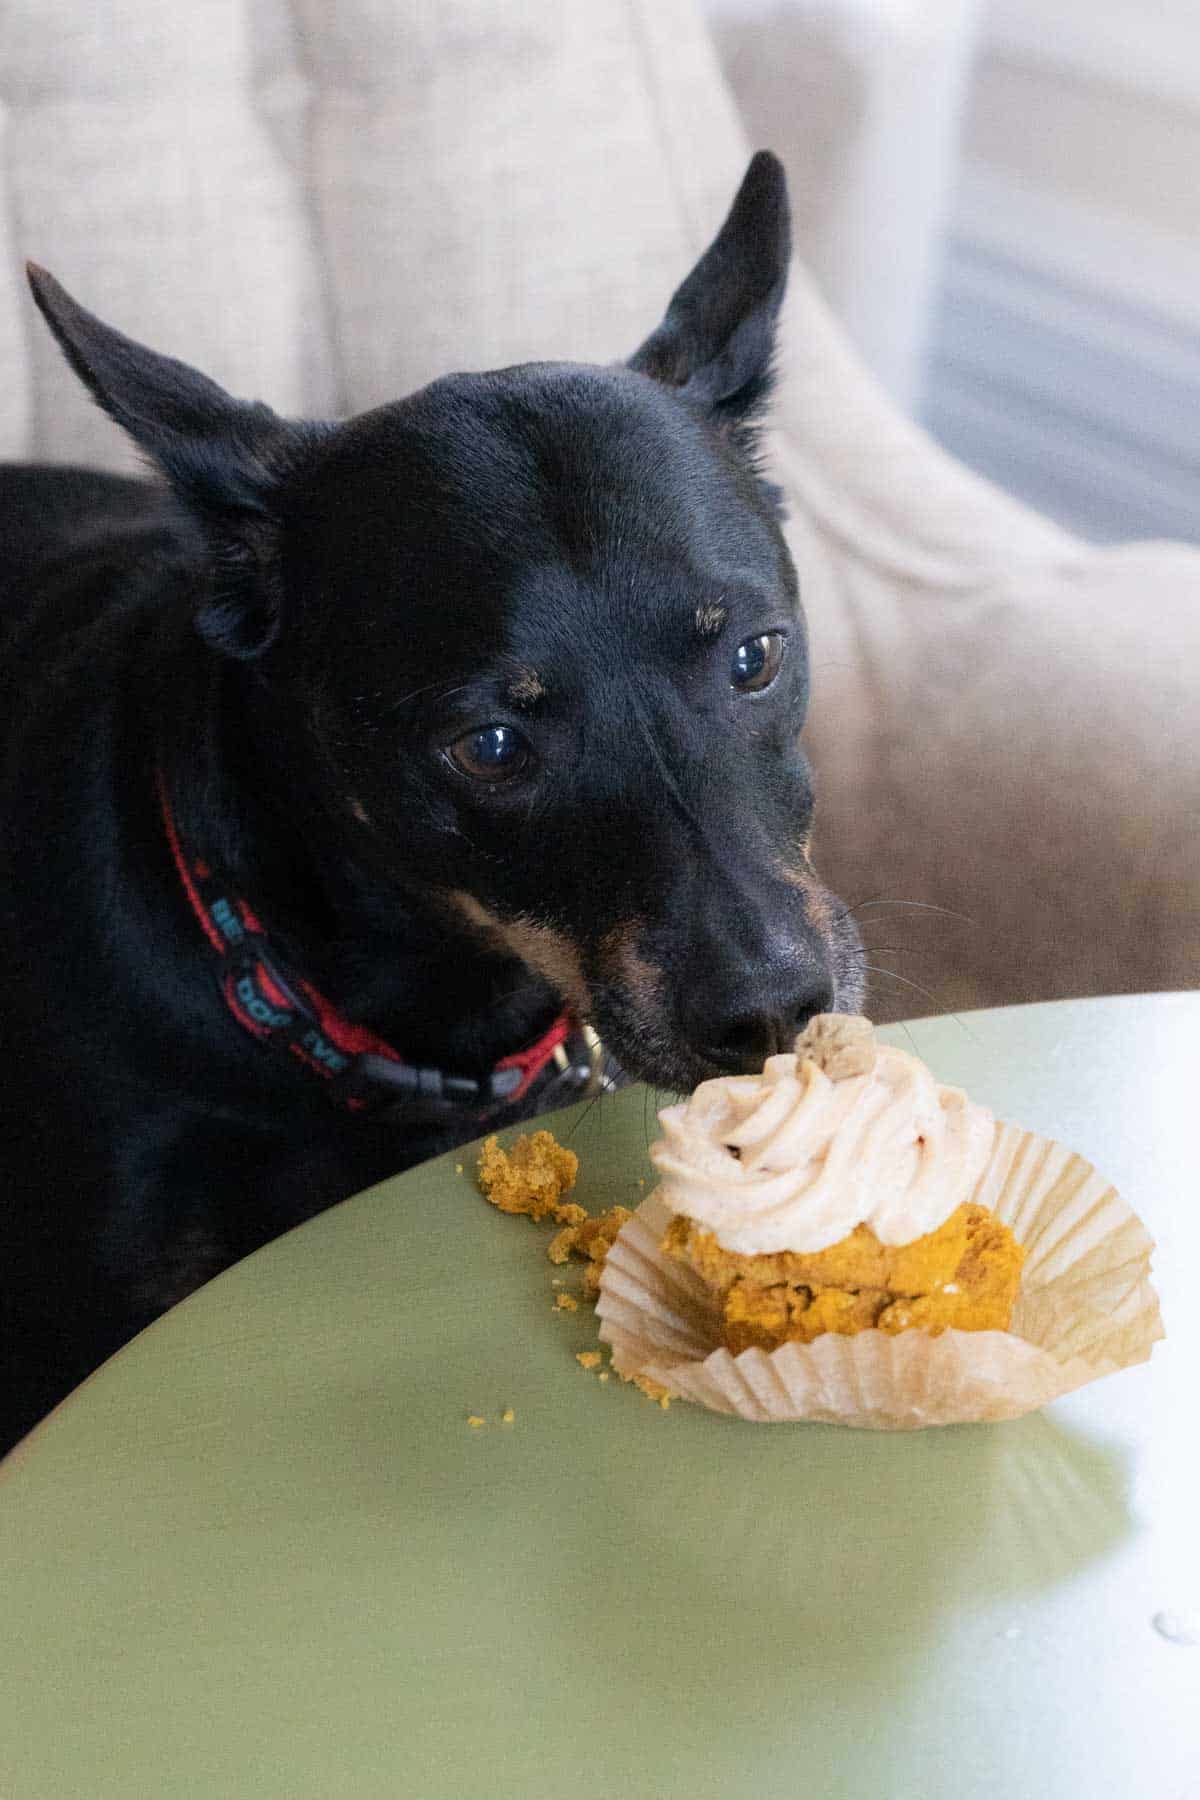 A puppy eating a doggie cupcake.